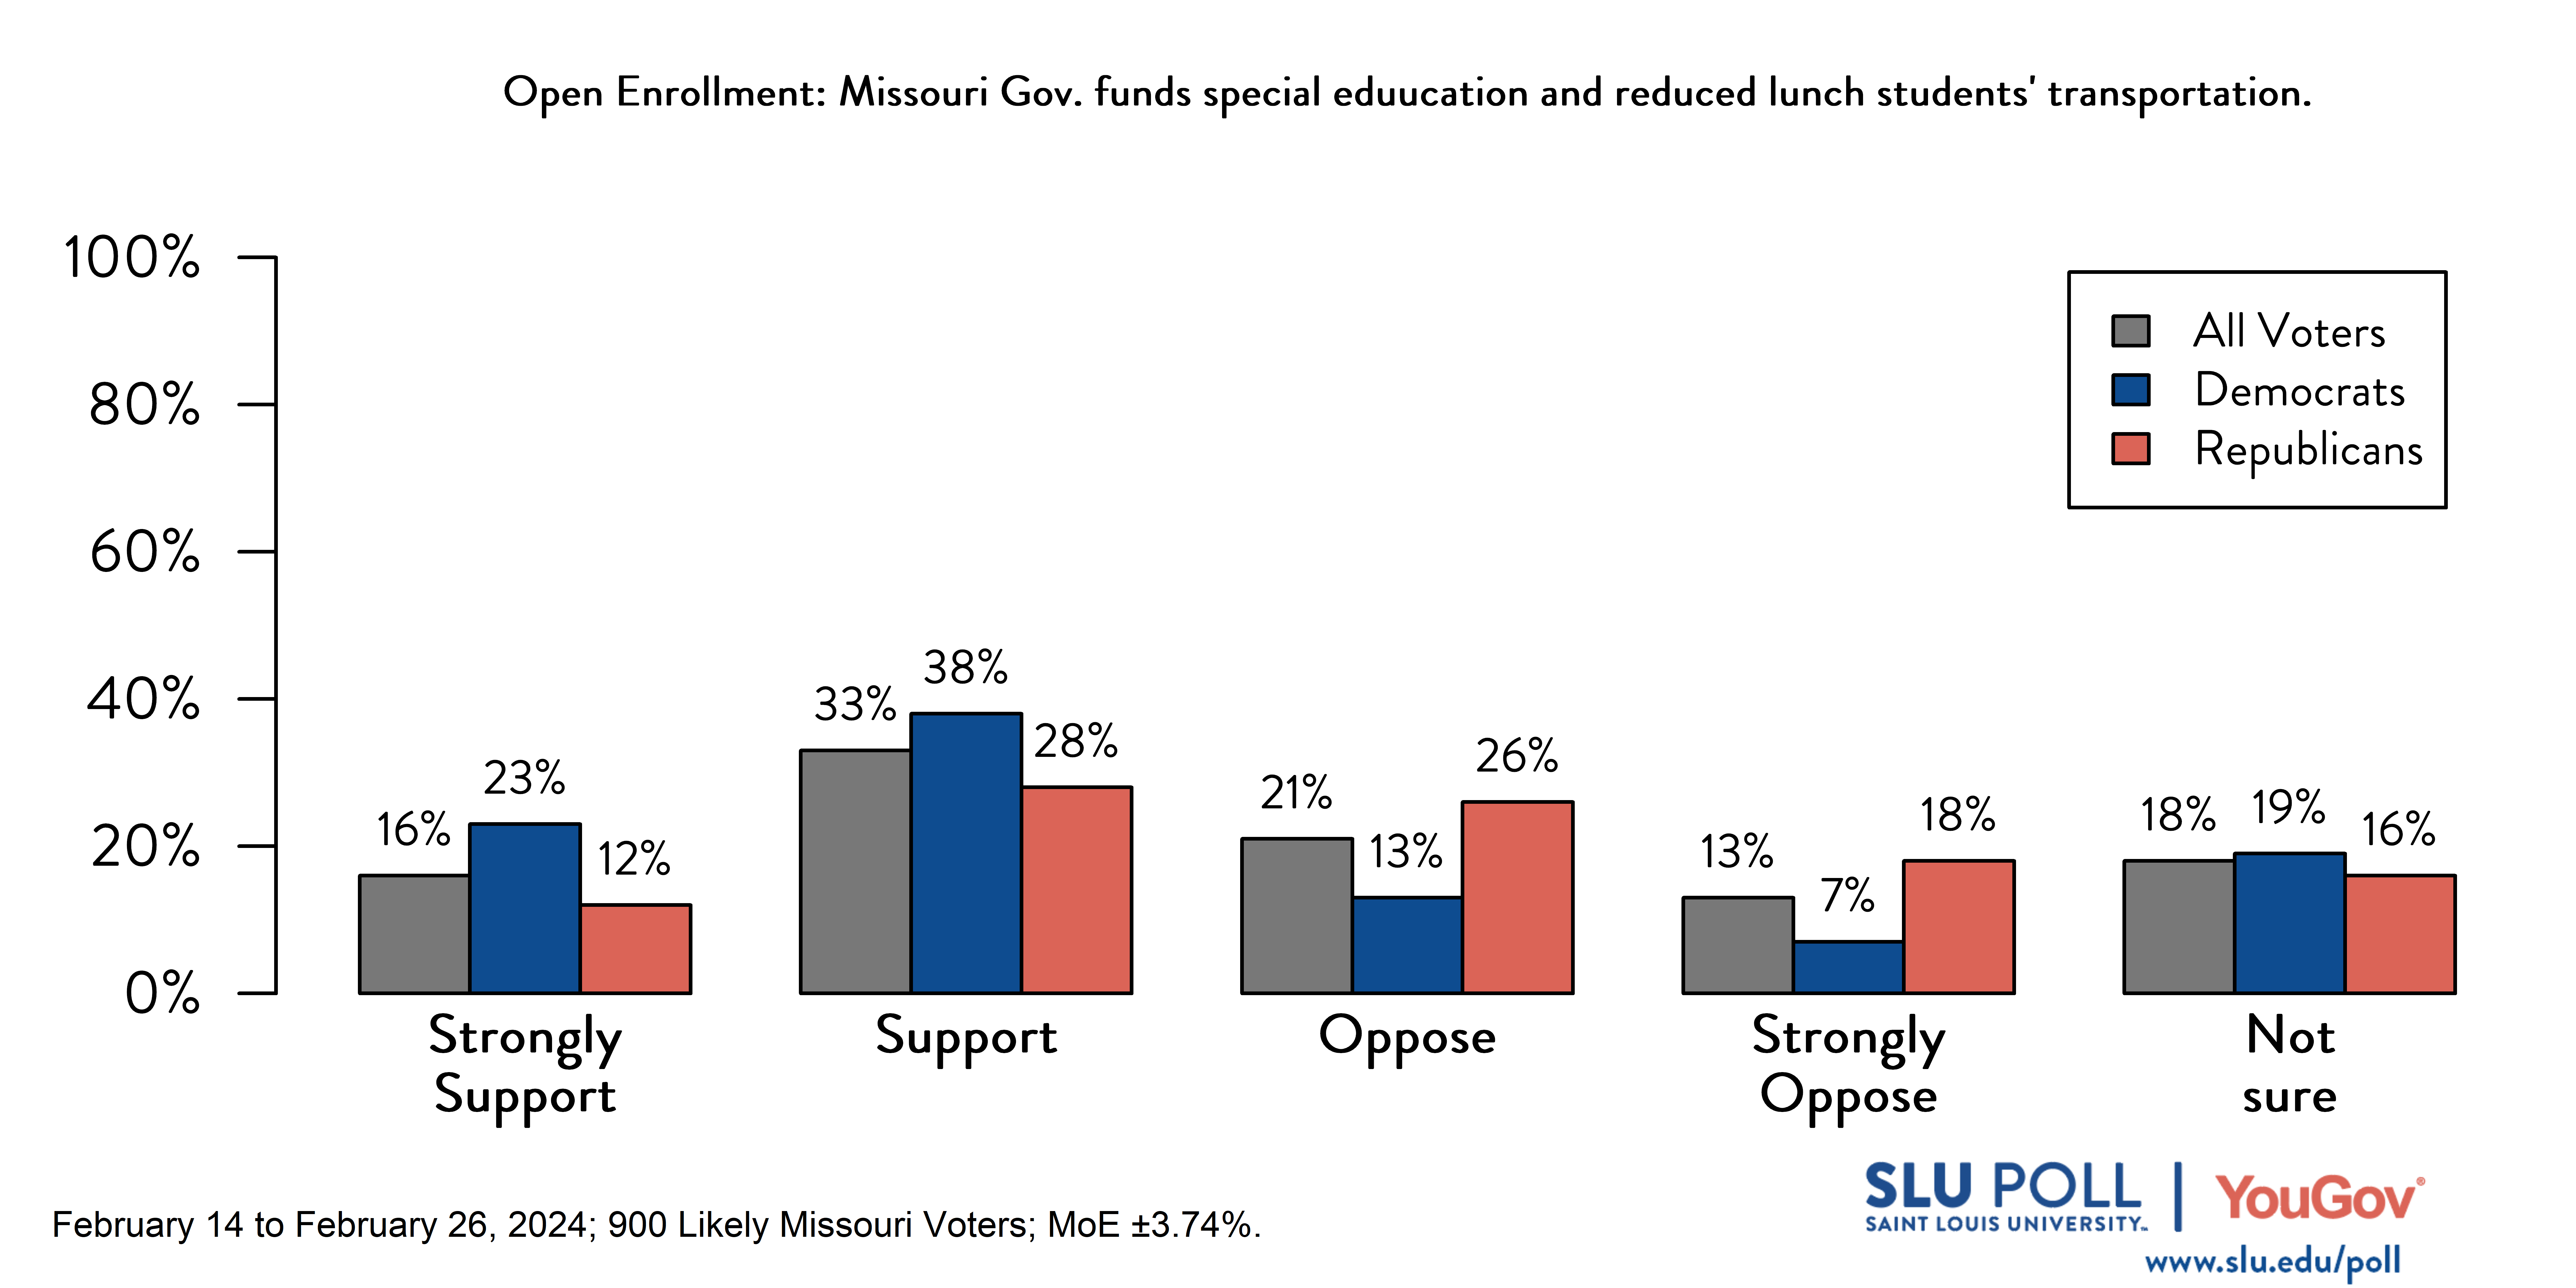 Likely voters' responses to 'If Missouri allows students to enroll in public schools outside of their resident school districts (that is, the district where they live) indicate whether you support or oppose the following…The State of Missouri should reimburse the receiving school district for the transportation costs of nonresident students who qualify for free or reduced-price school lunch or special education services?': 16% Strongly support, 33% Support, 21% Oppose, 13% Strongly oppose, and 18% Not sure. Democratic voters' responses: ' 23% Strongly support, 38% Support, 13% Oppose, 7% Strongly oppose, and 19% Not sure. Republican voters' responses:  12% Strongly support, 28% Support, 26% Oppose, 18% Strongly oppose, and 16% Not sure.